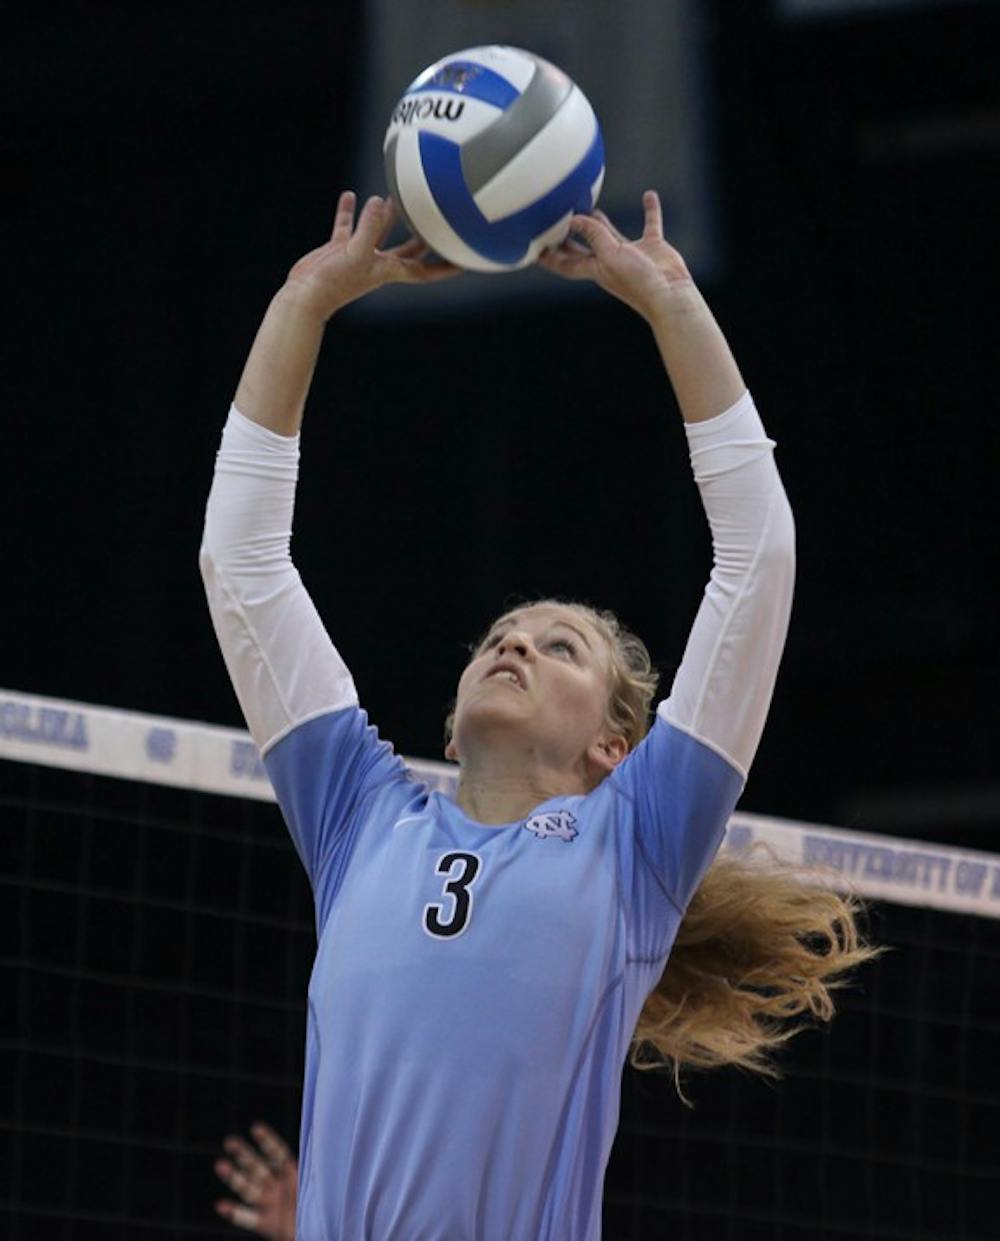 UNC beat Georgia Tech in Volleyball Sunday, September 30.